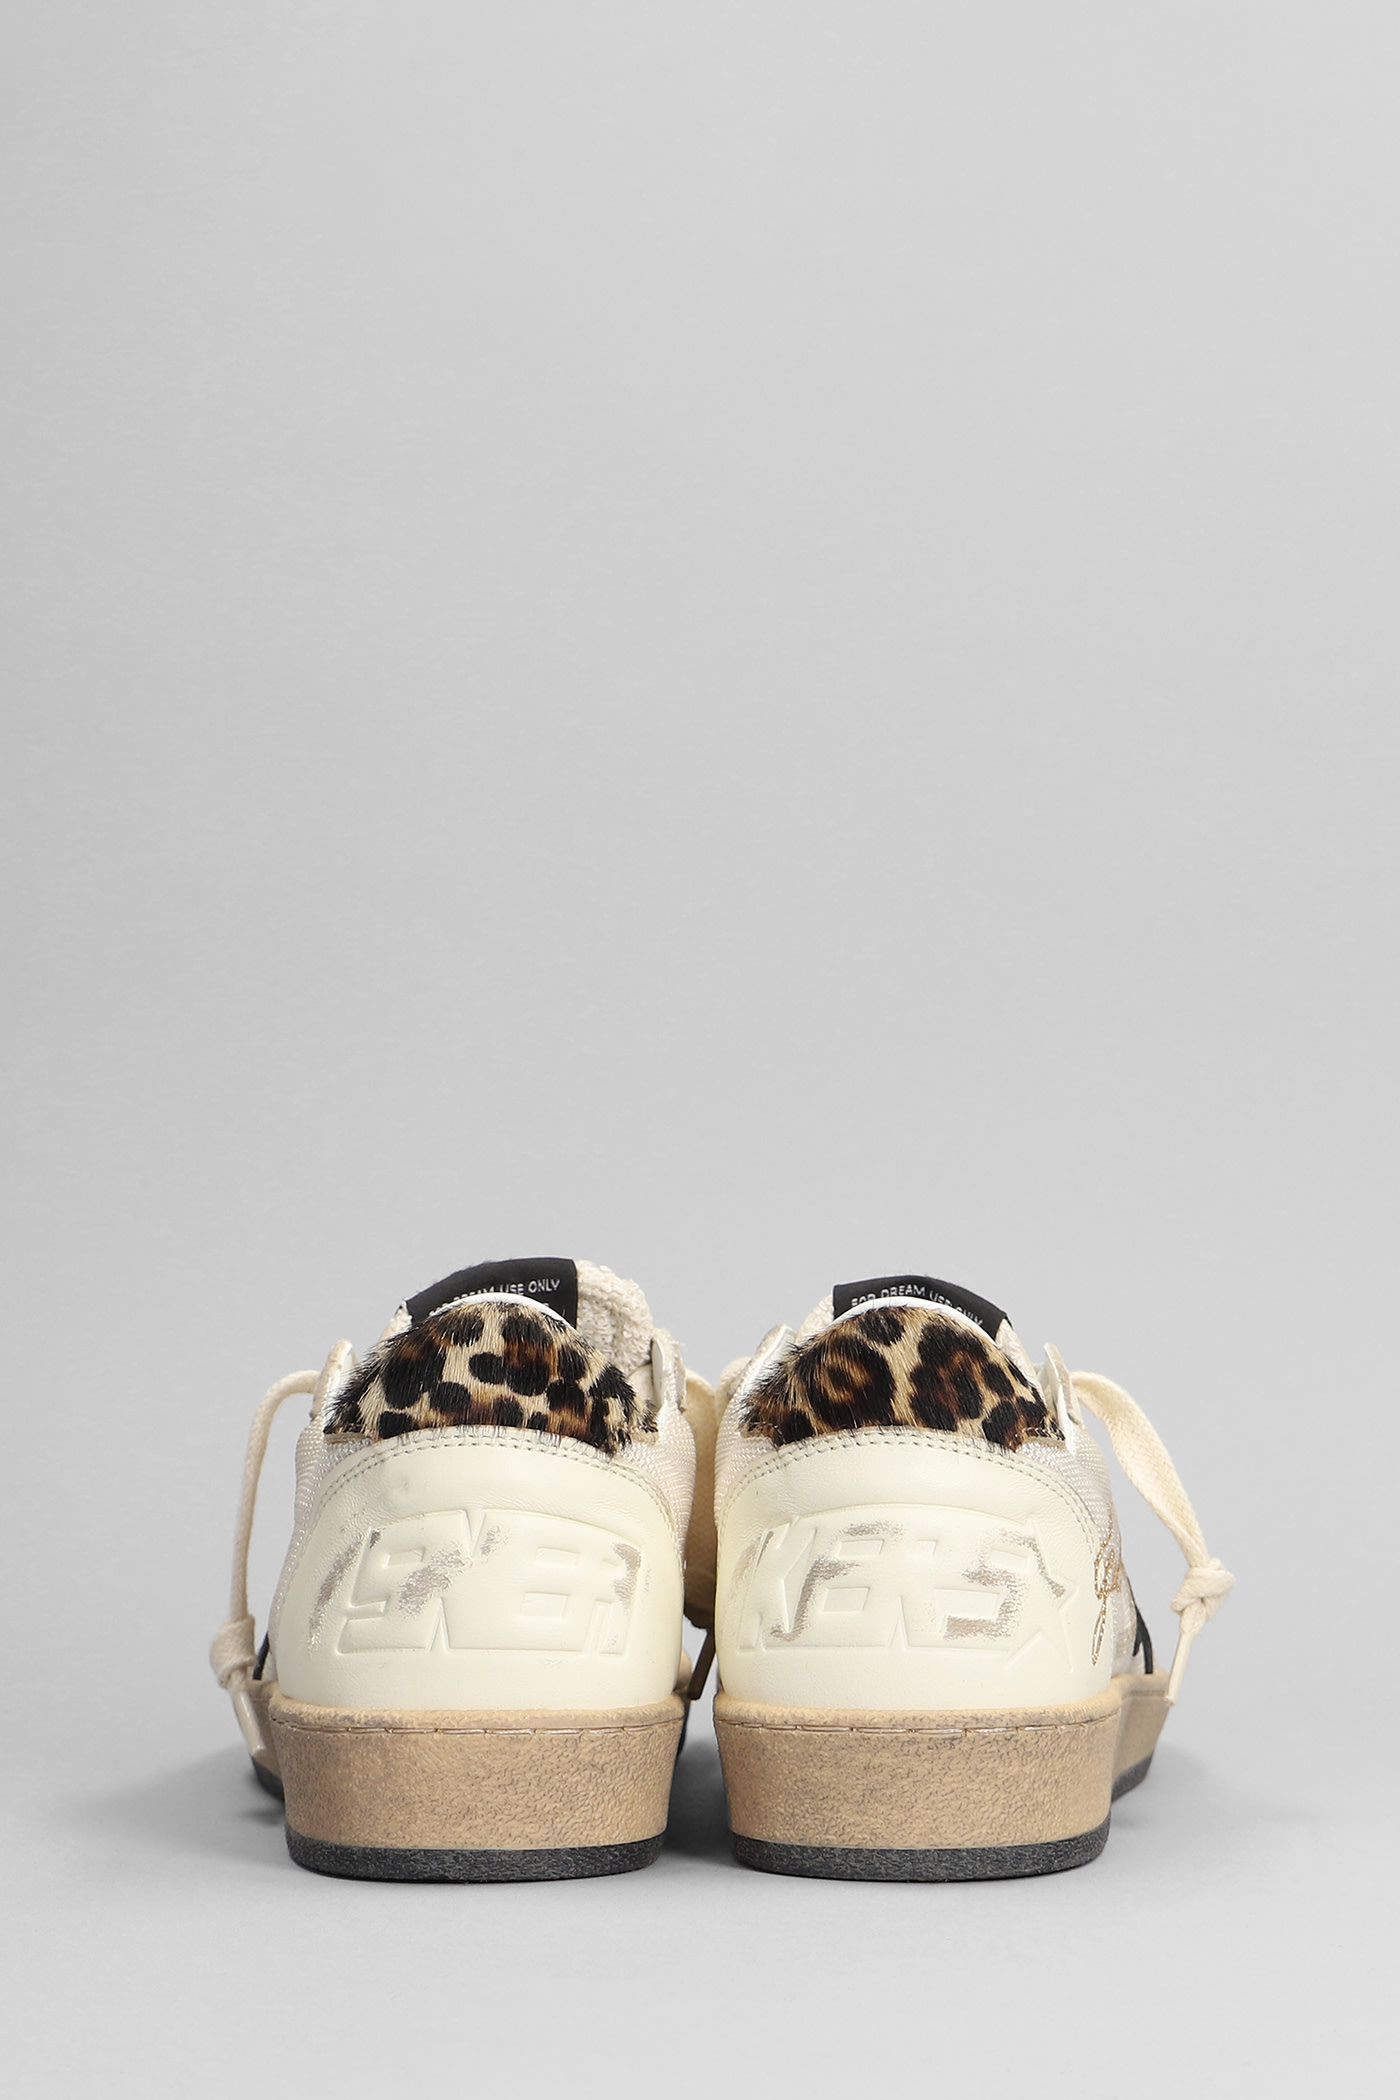 Shop Golden Goose Ball Star Sneakers In Beige Leather And Fabric